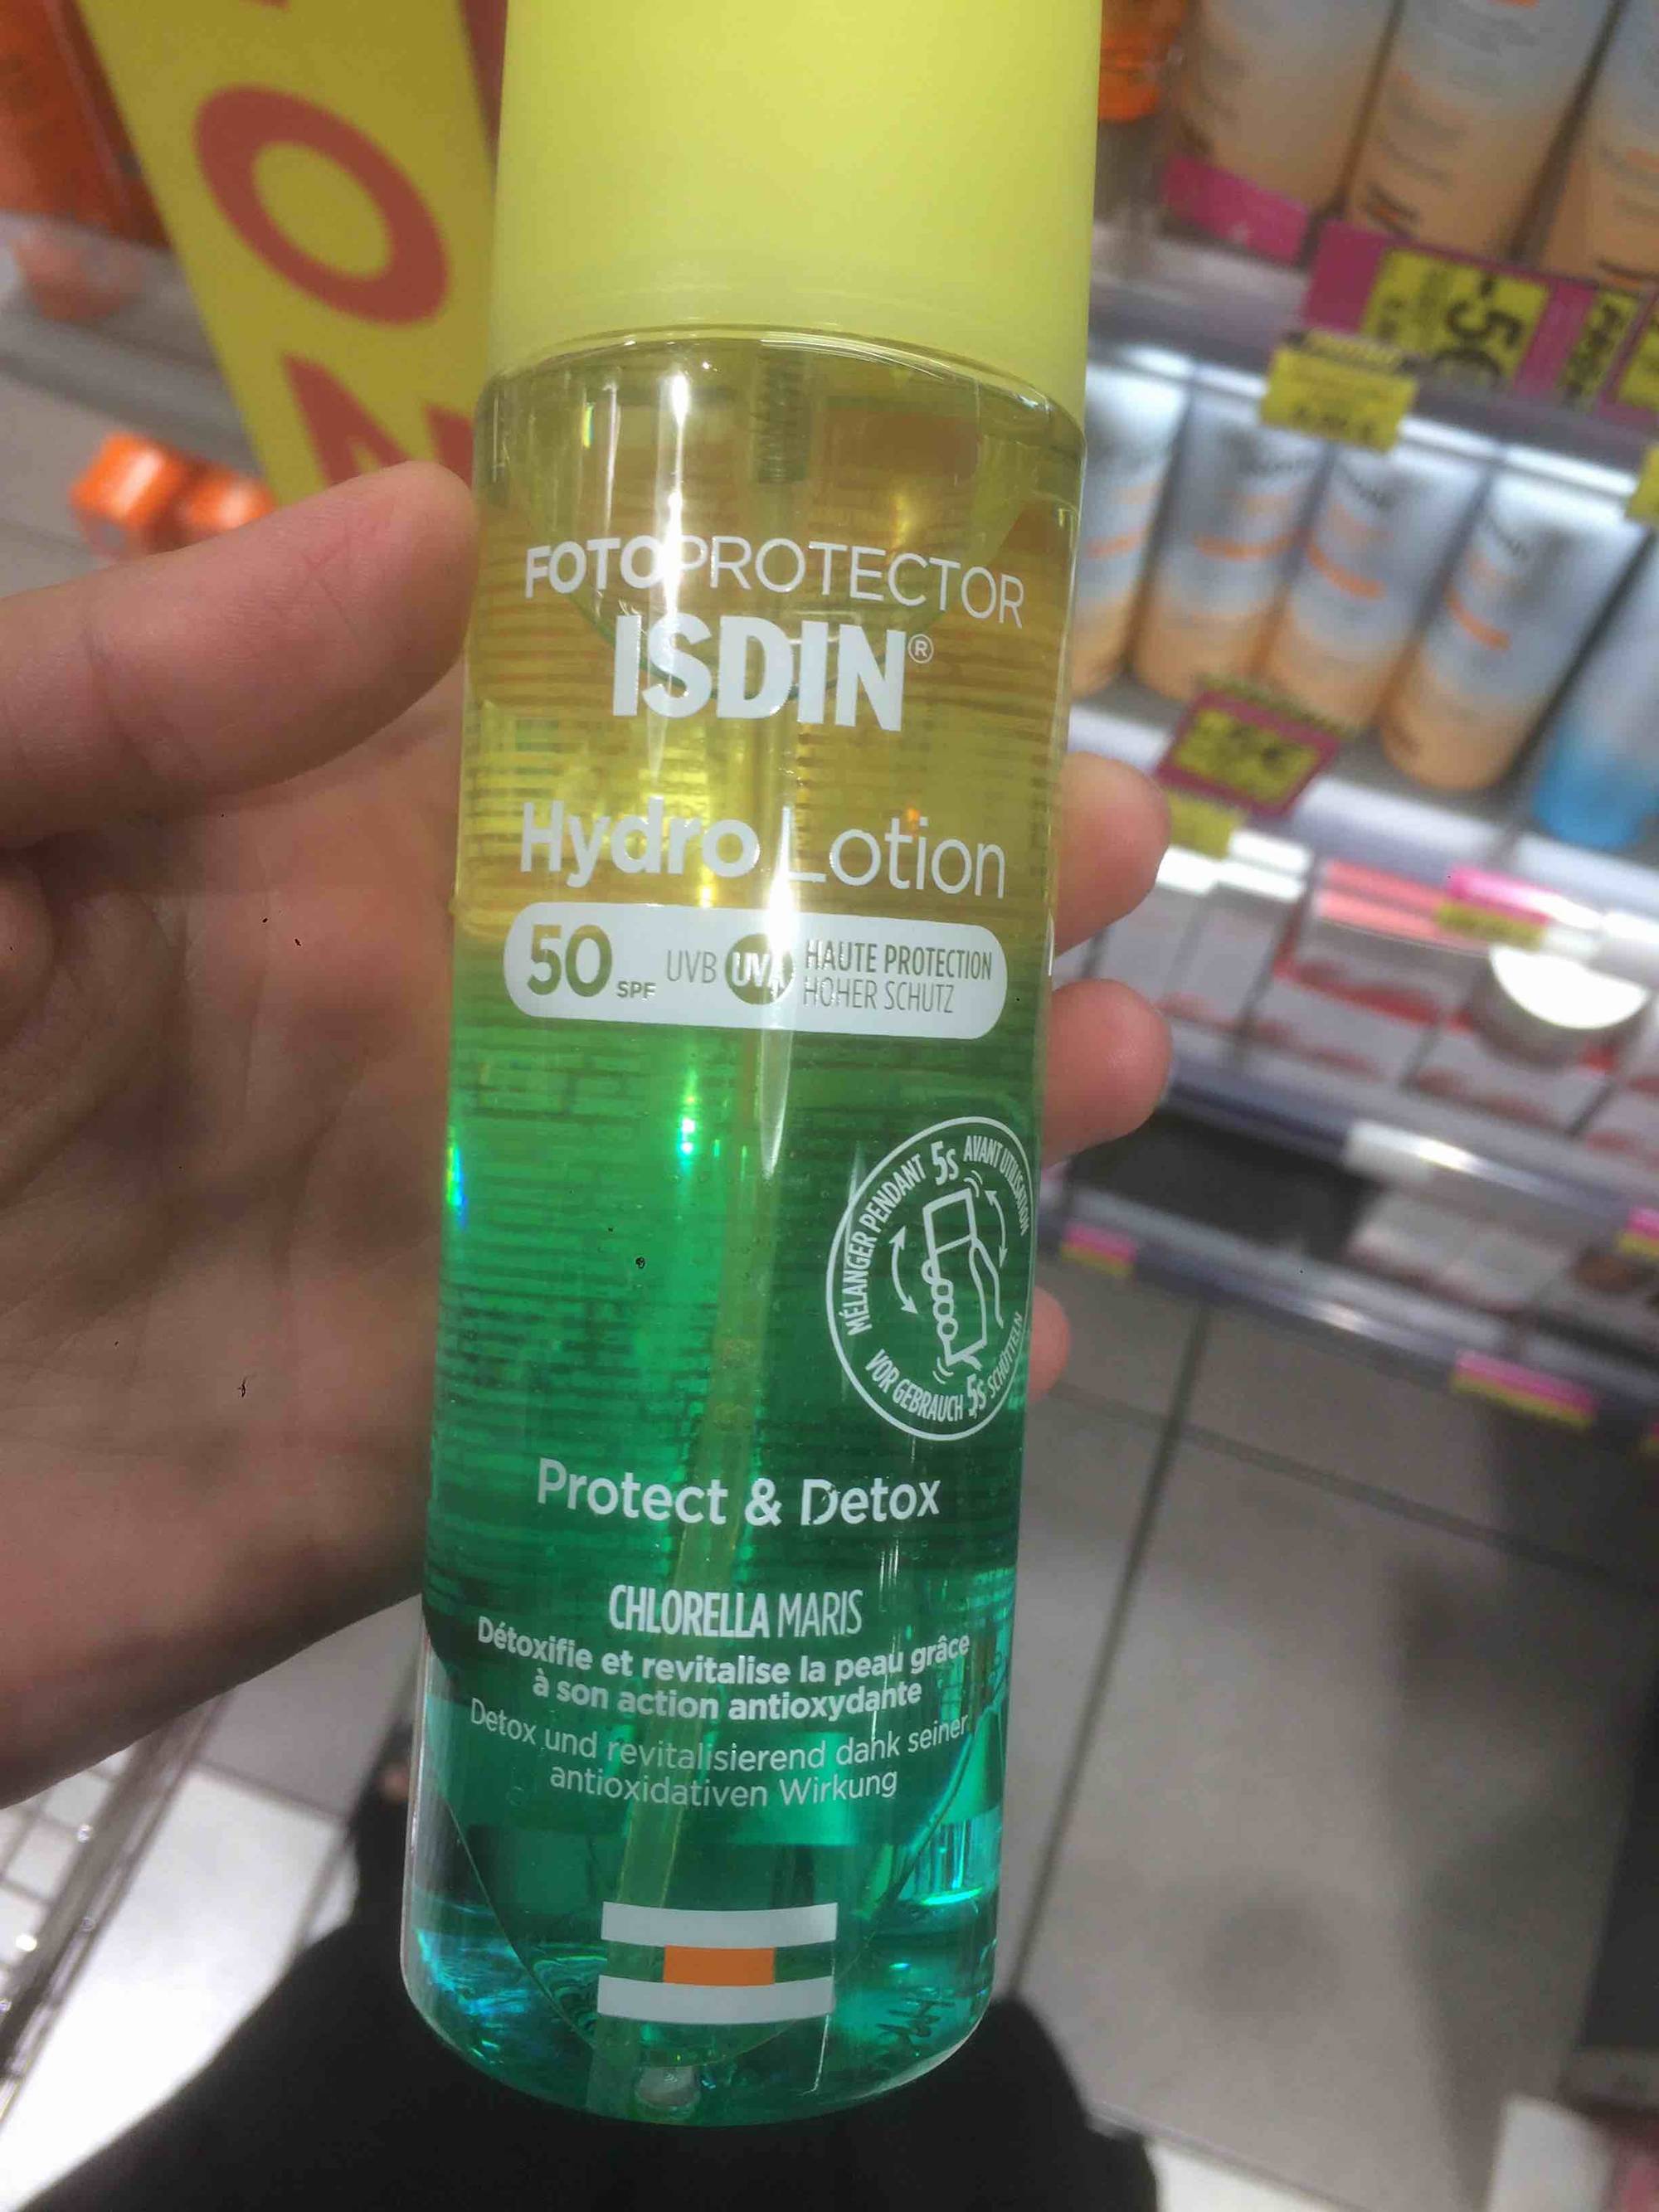 ISDIN - Fotoprotector protect & detox - Hydro lotion SPF 50